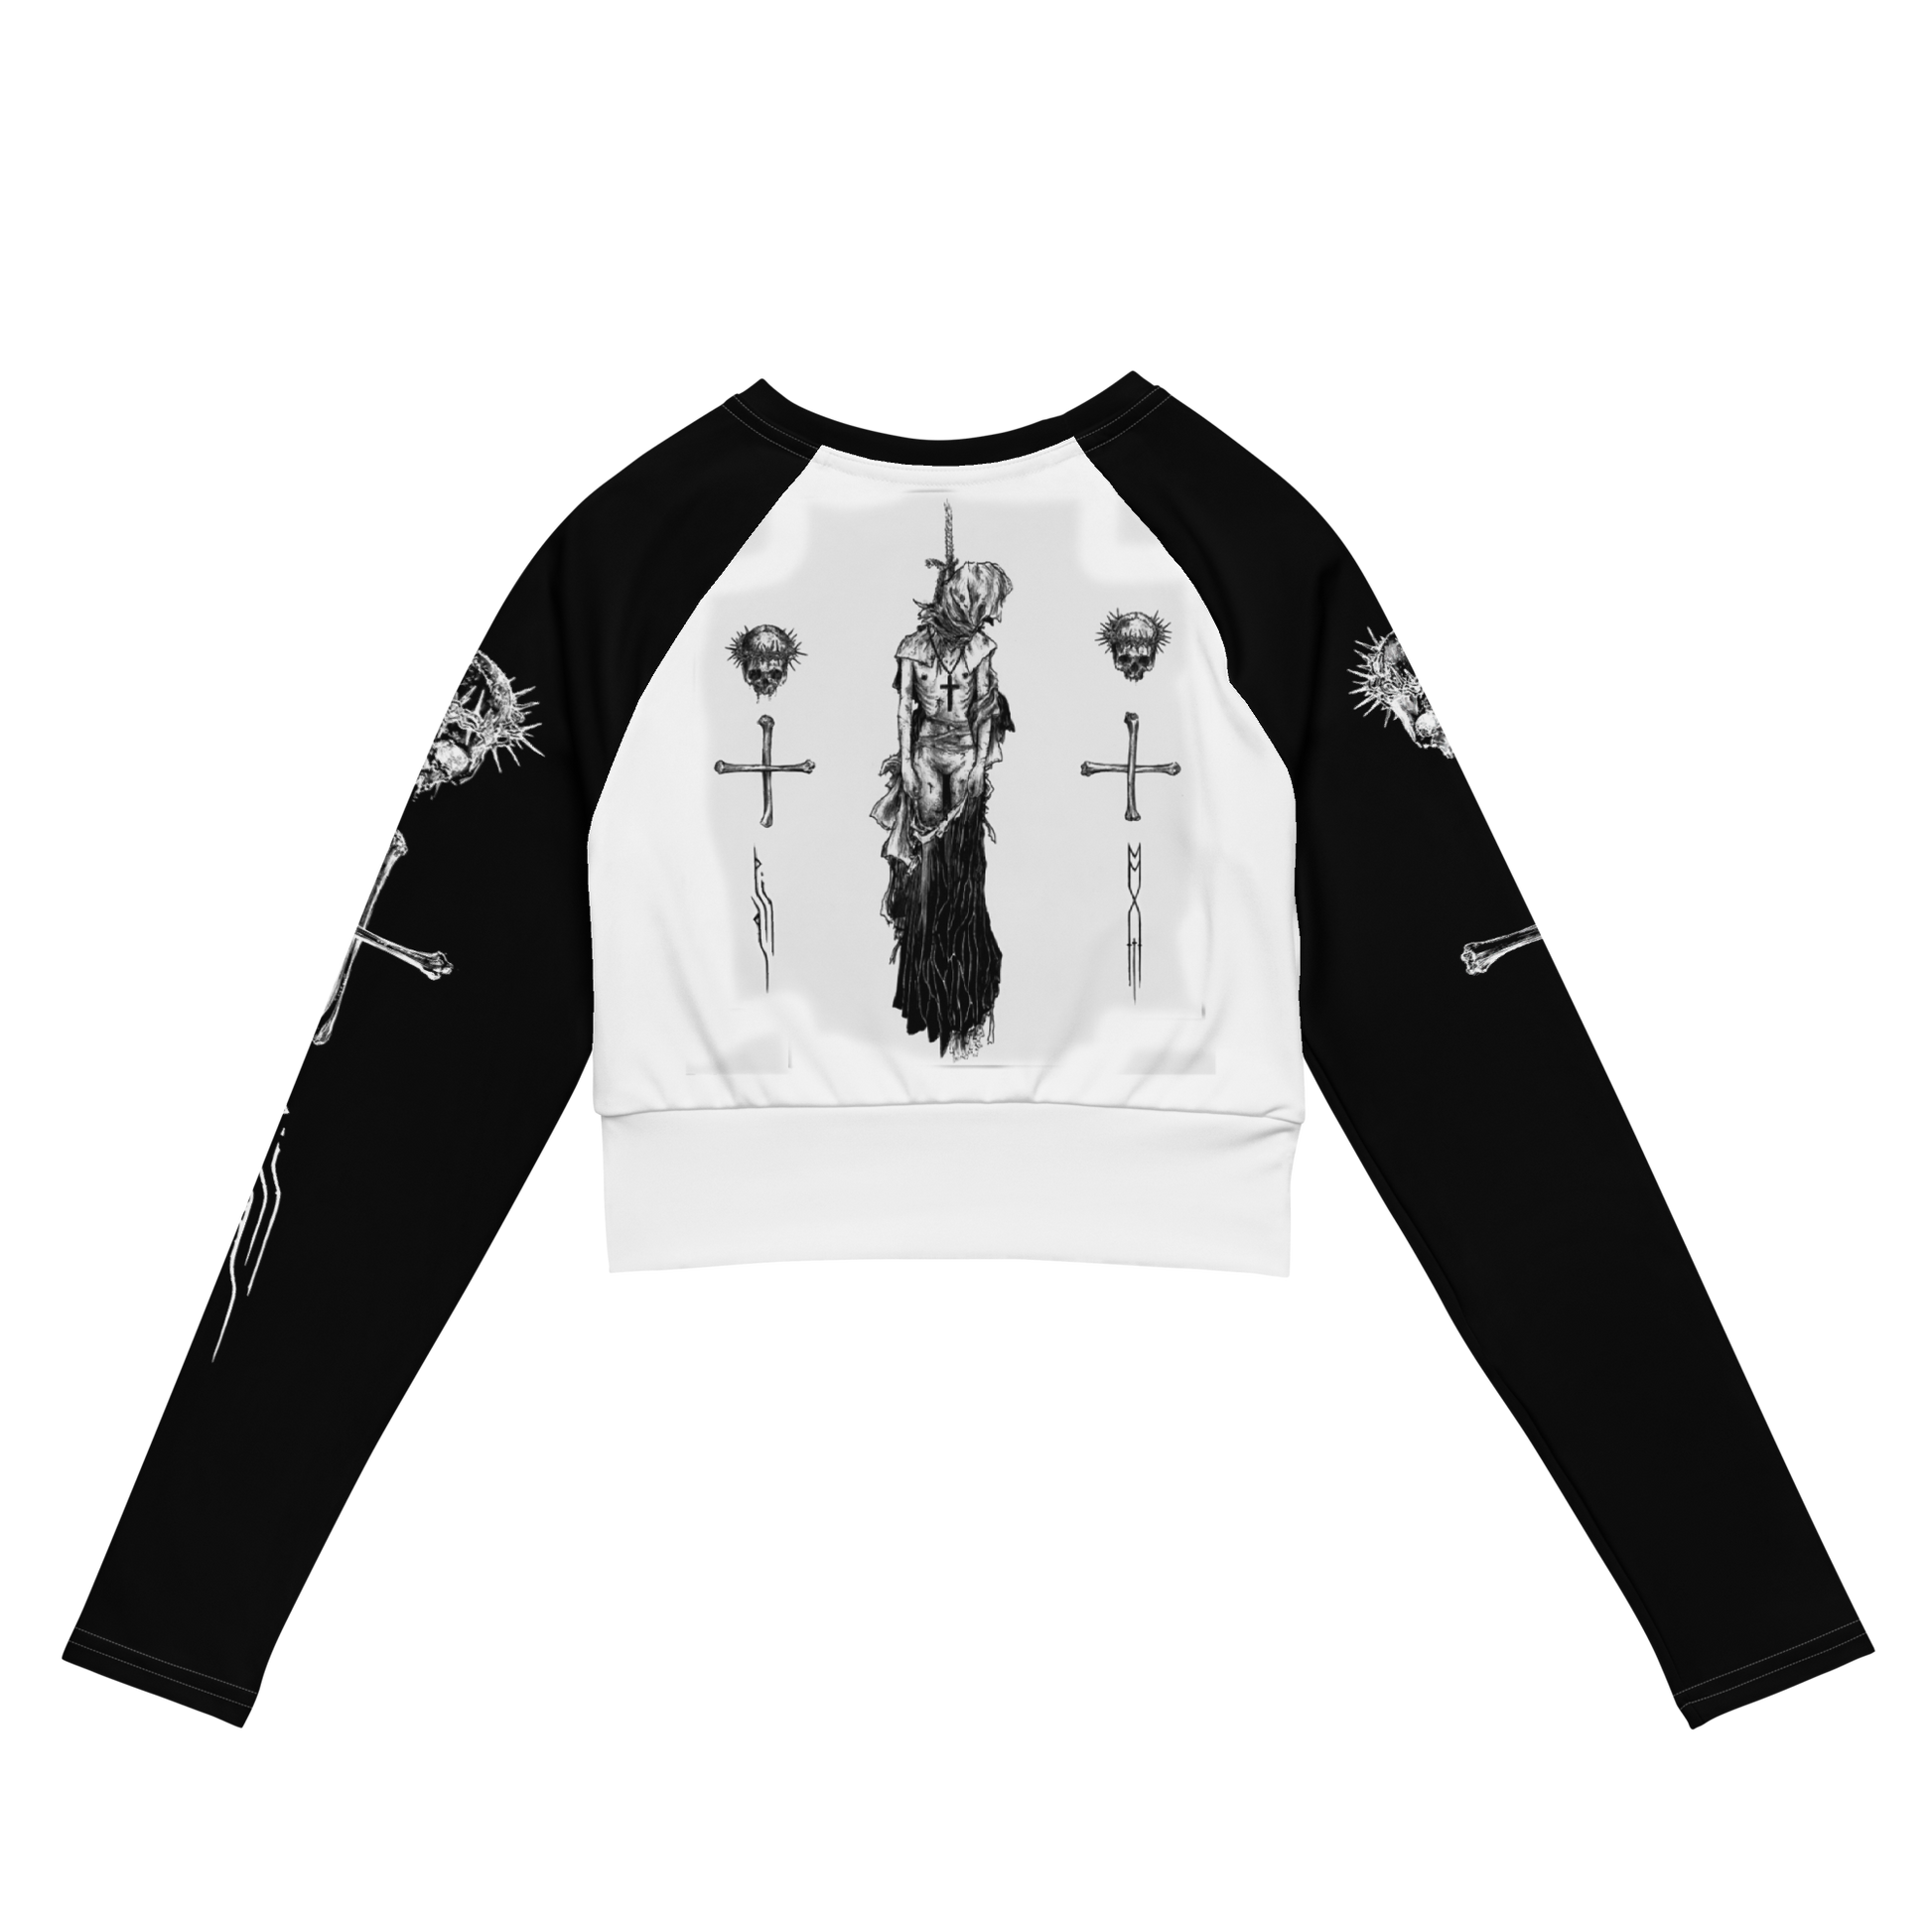 Nunslaughter Angelic Dread official long sleeve crop top with black sleeves by Metal Mistress